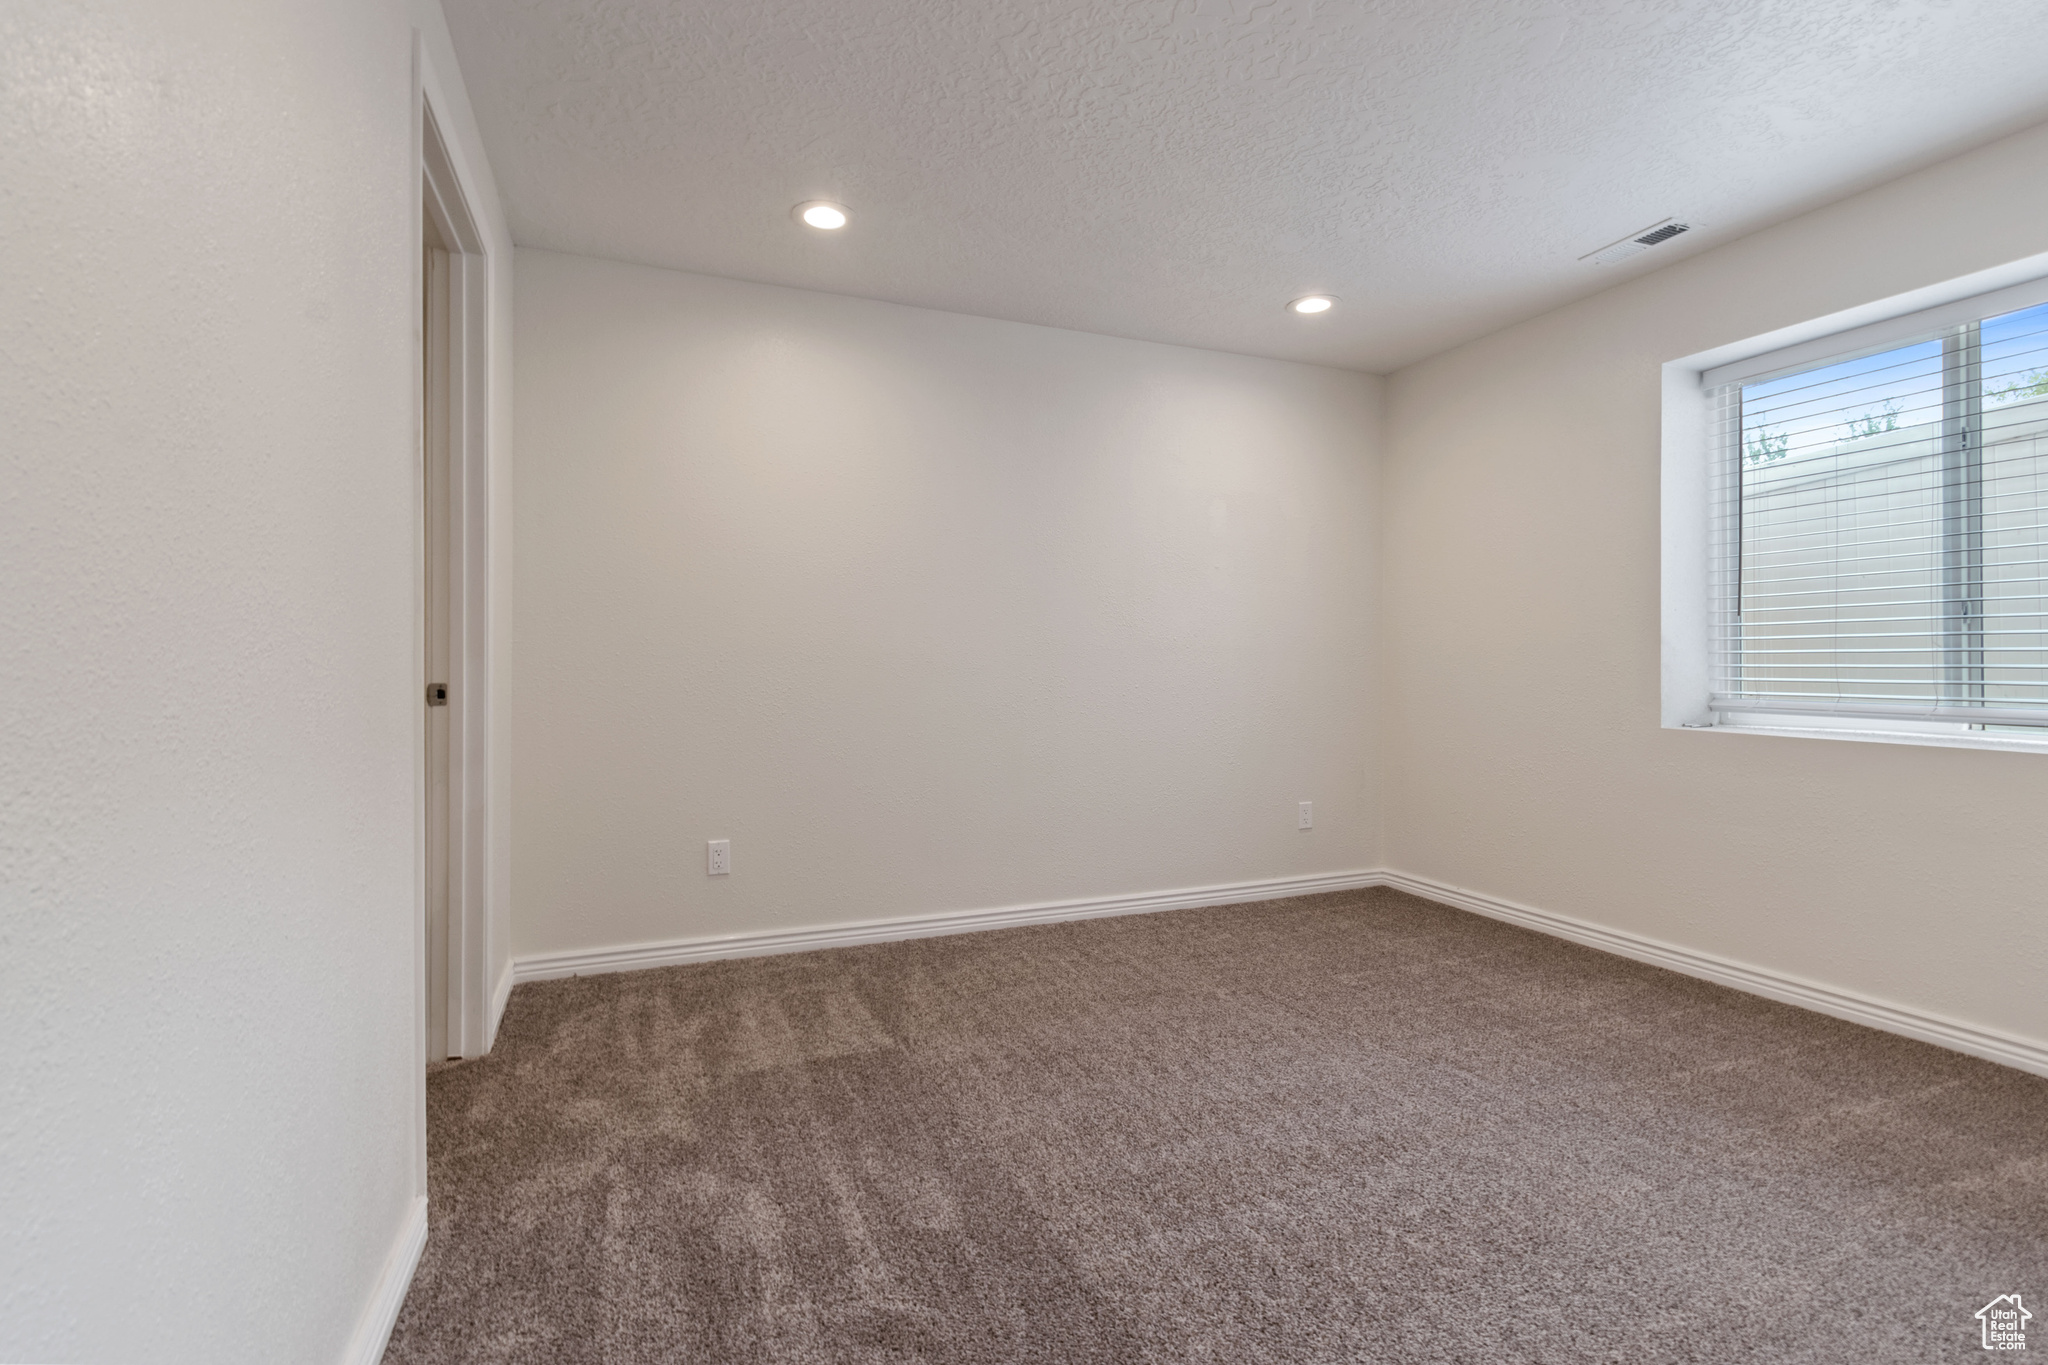 Empty room featuring a textured ceiling and carpet flooring